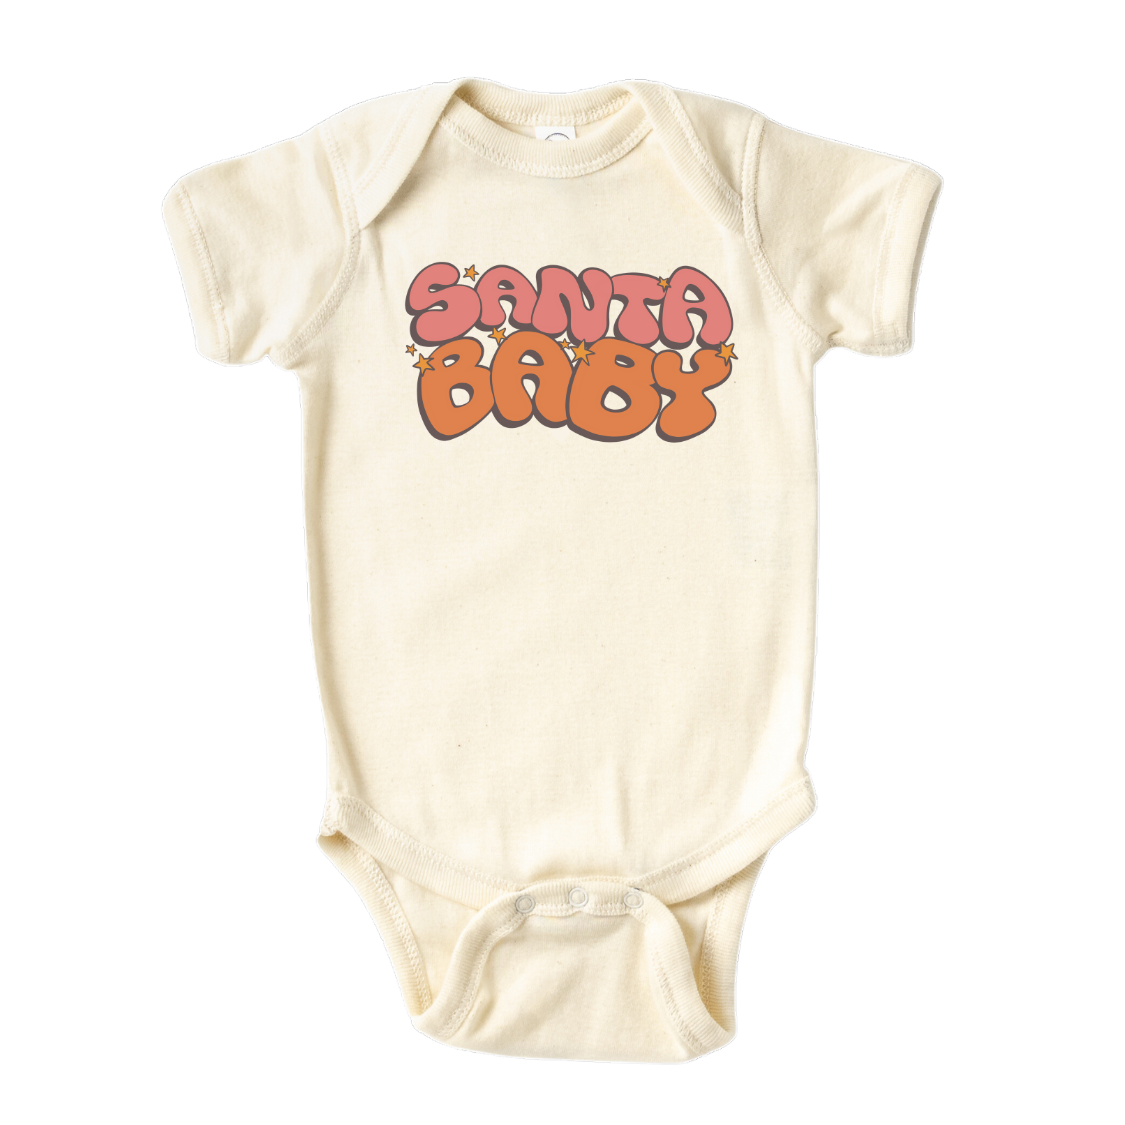 Natural onesie with a retro printed graphic and the text 'Santa Baby.' This festive and charming design is perfect for the Christmas season.